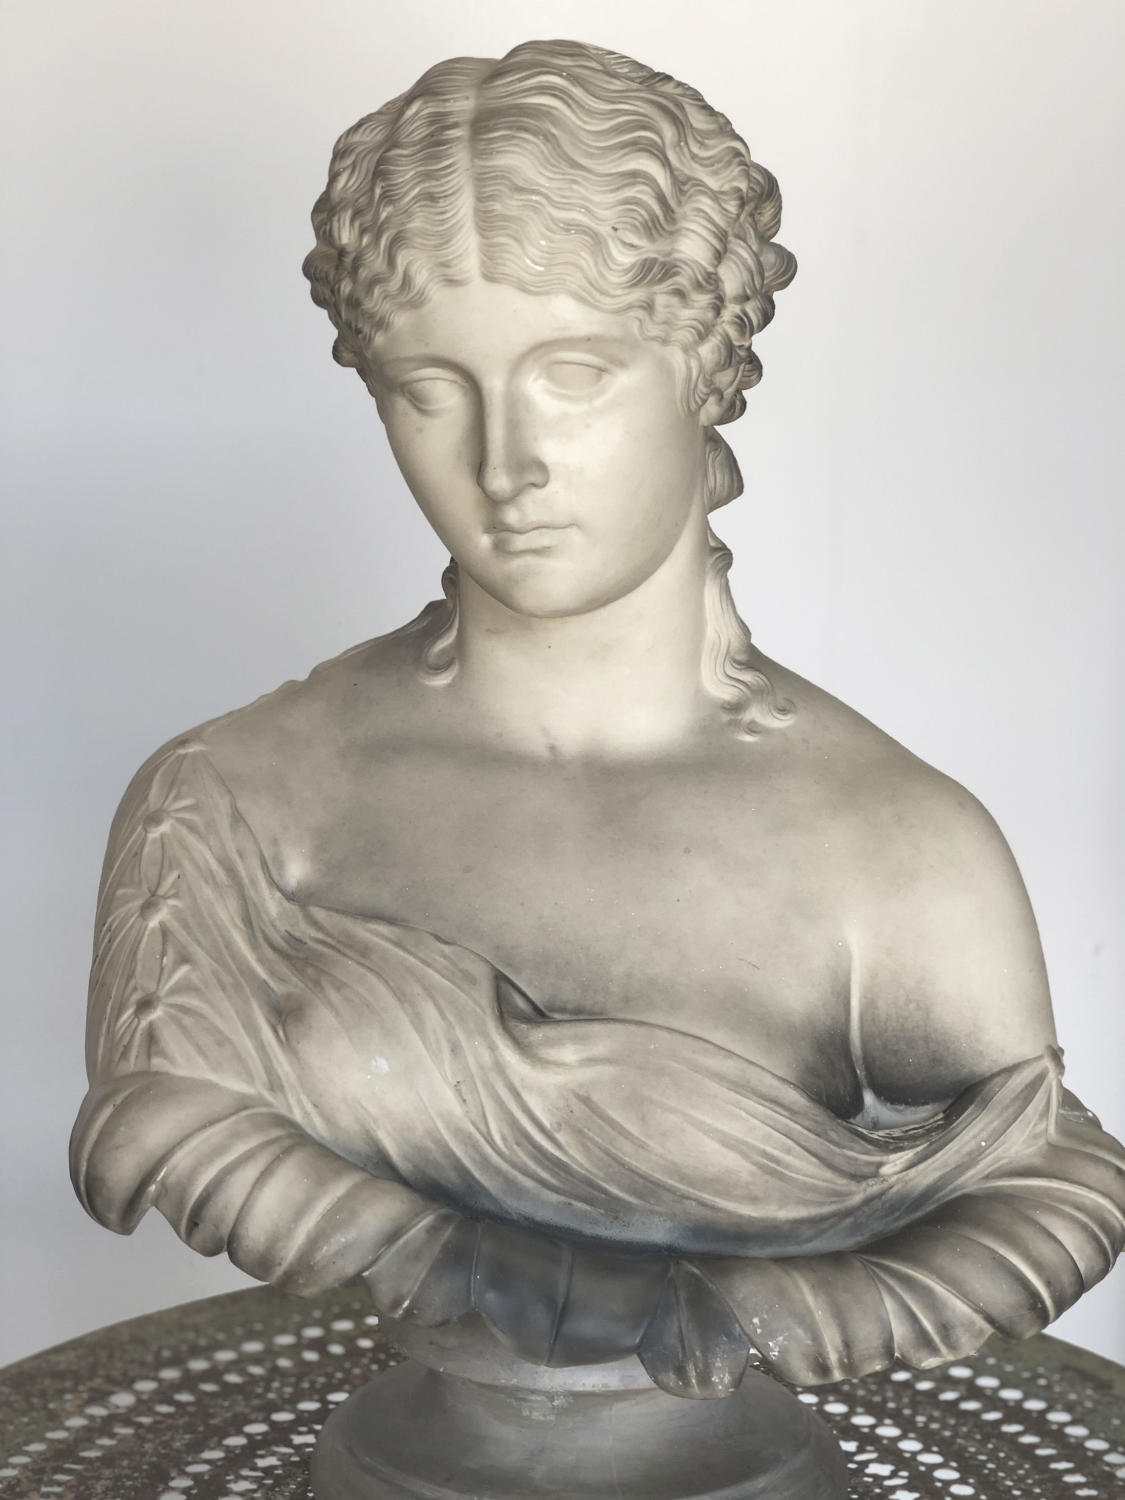 19th c Plaster Bust of Clytie, the Water Nymph